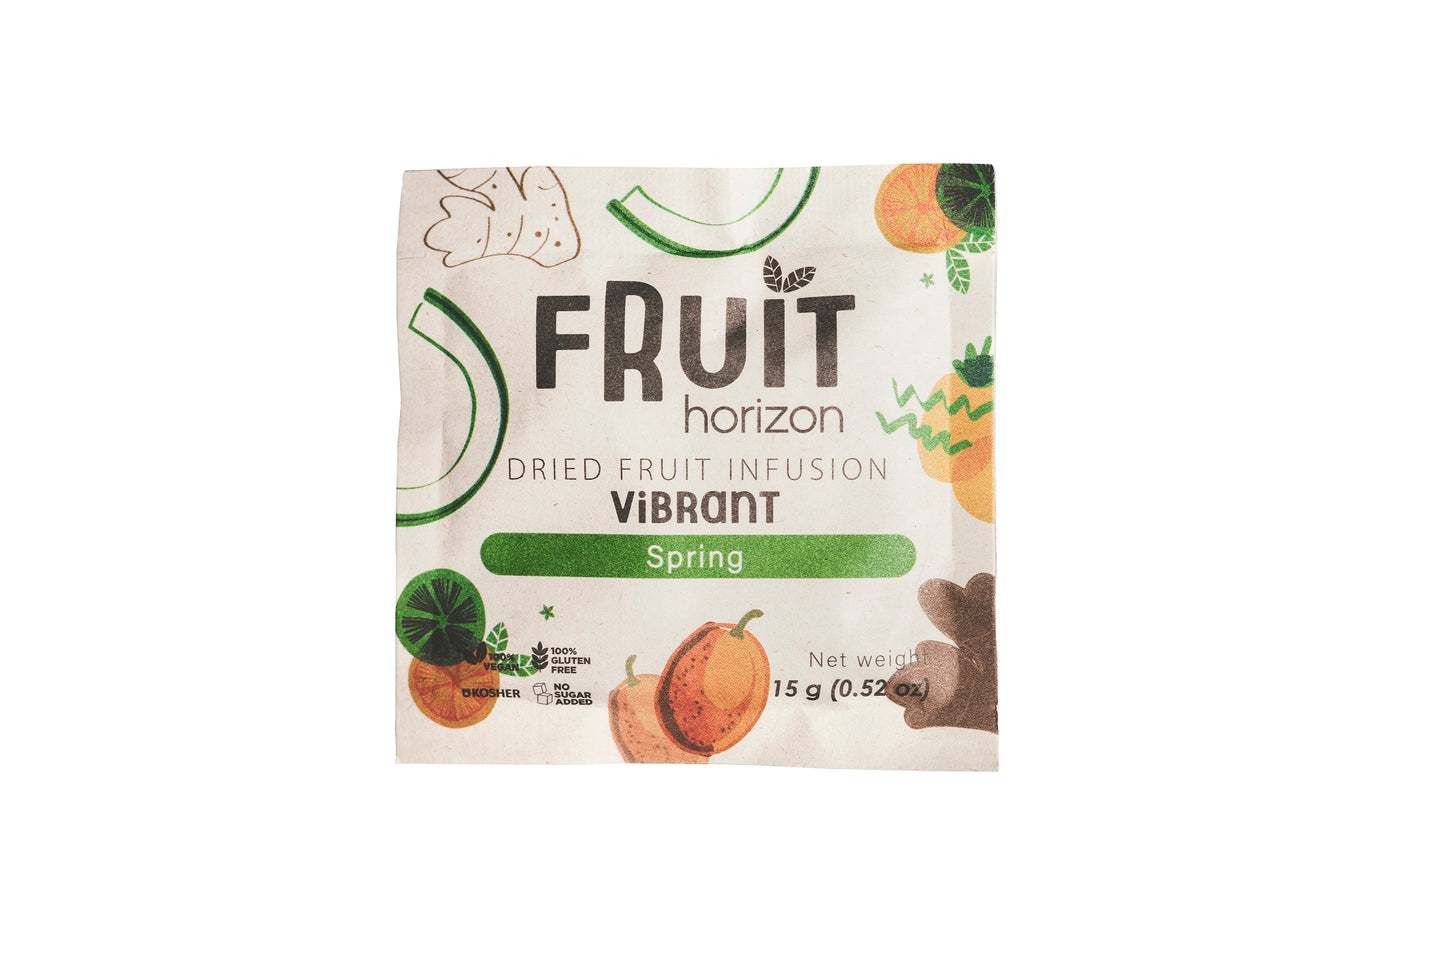 Fruit Horizon fruit infusion "Vibrant" 24 pieces (refill pack for gift box)